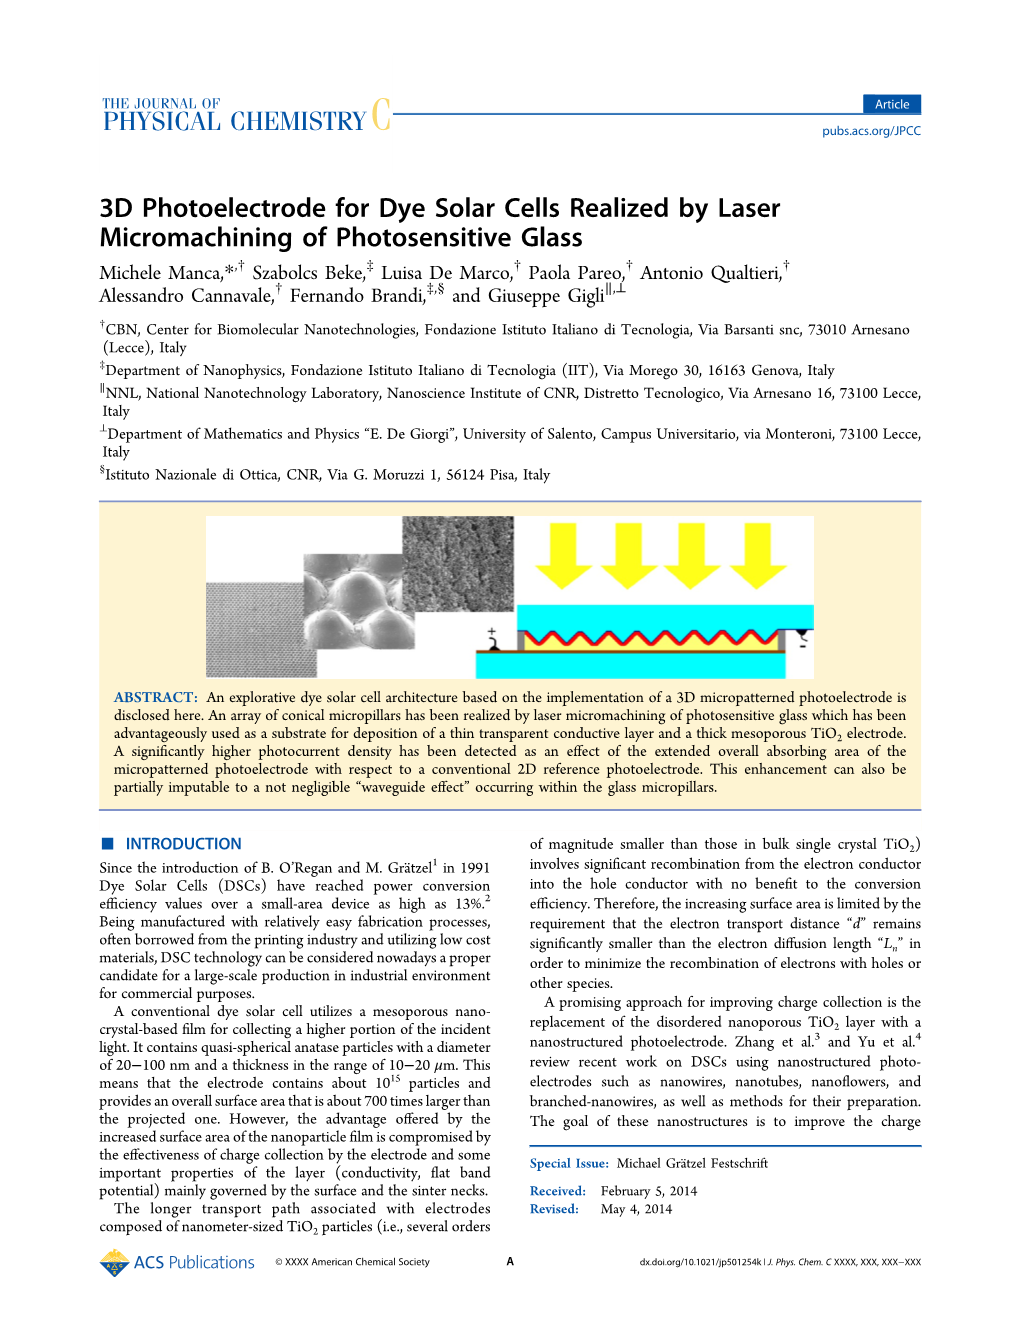 3D Photoelectrode for Dye Solar Cells Realized by Laser Micromachining